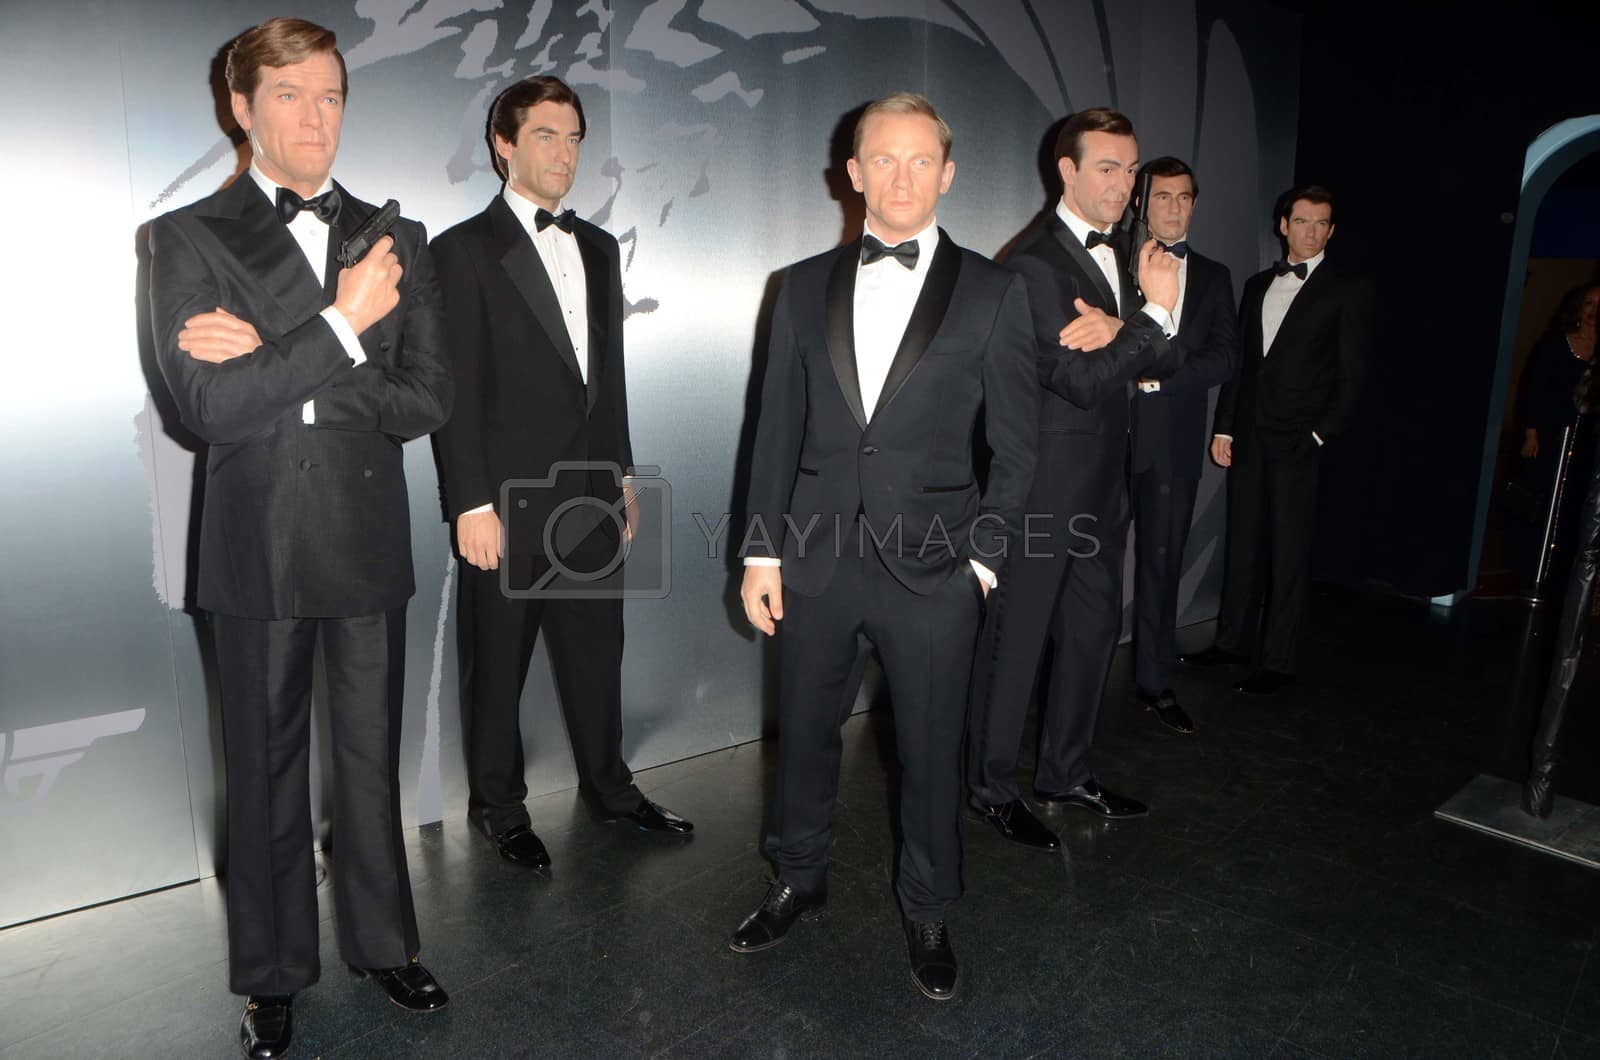 Royalty free image of Atmosphere Madame Tussauds Hollywood Reveals All Six James Bonds In Wax. Madame Tussauds, Hollywood, CA 12-15-15/ImageCollect by ImageCollect